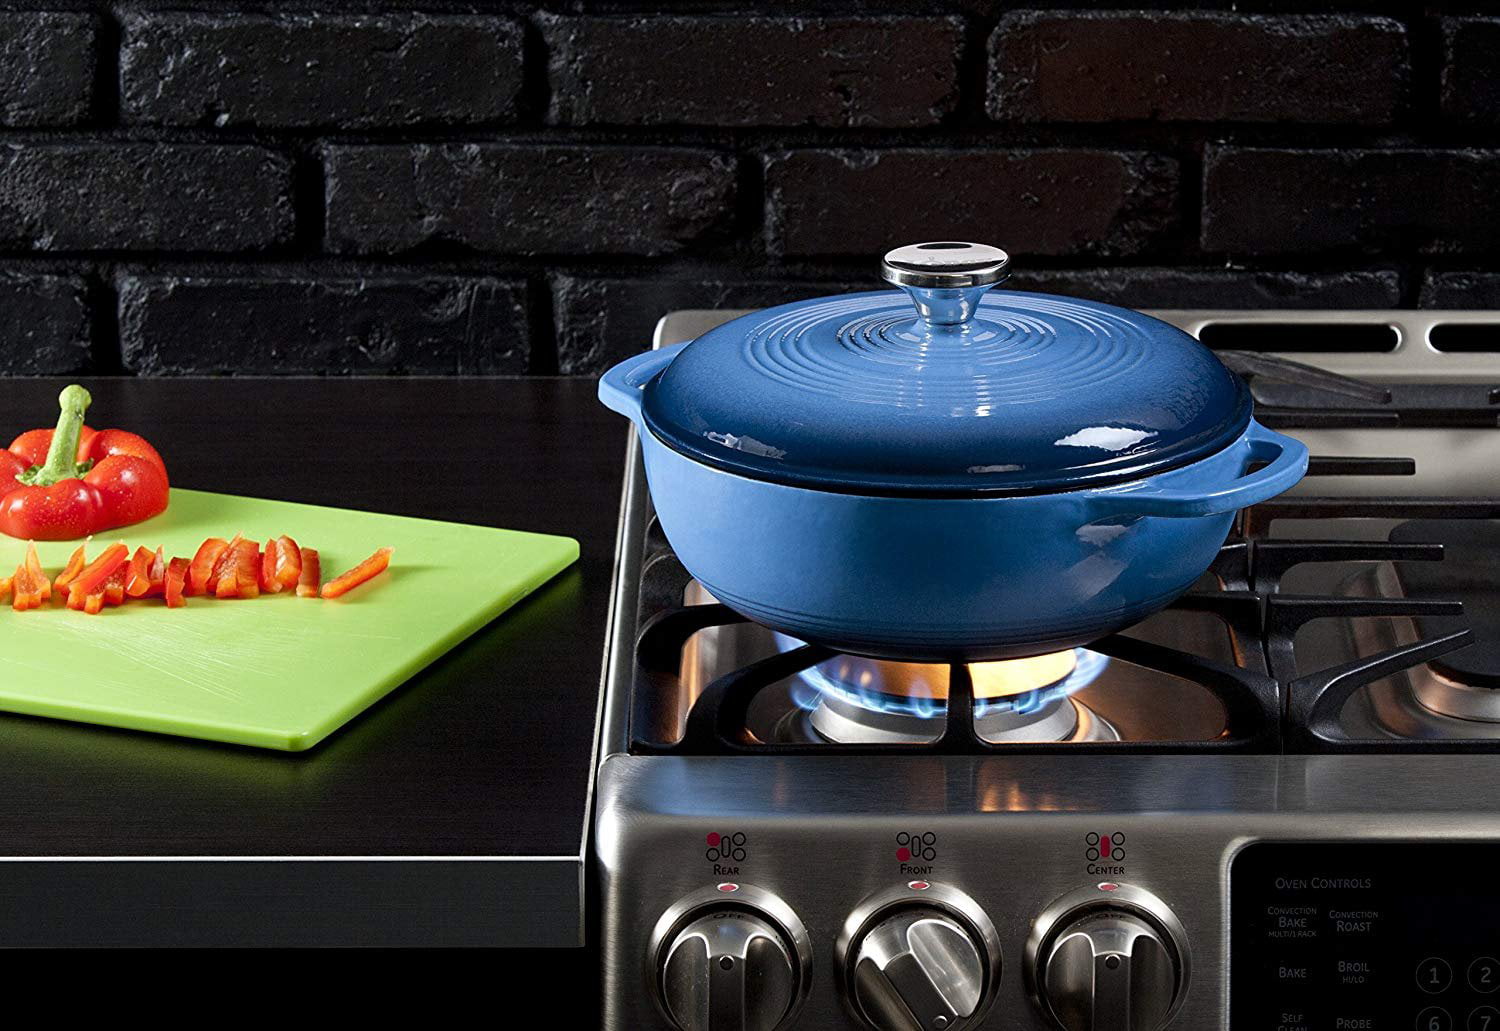 Lodge 7.5 Quart Enameled Cast Iron Dutch Oven with Lid – Dual Handles –  Oven Safe up to 500° F or on Stovetop - Use to Marinate, Cook, Bake,  Refrigerate and Serve – Caribbean Blue: Stock Pot: Home & Kitchen 